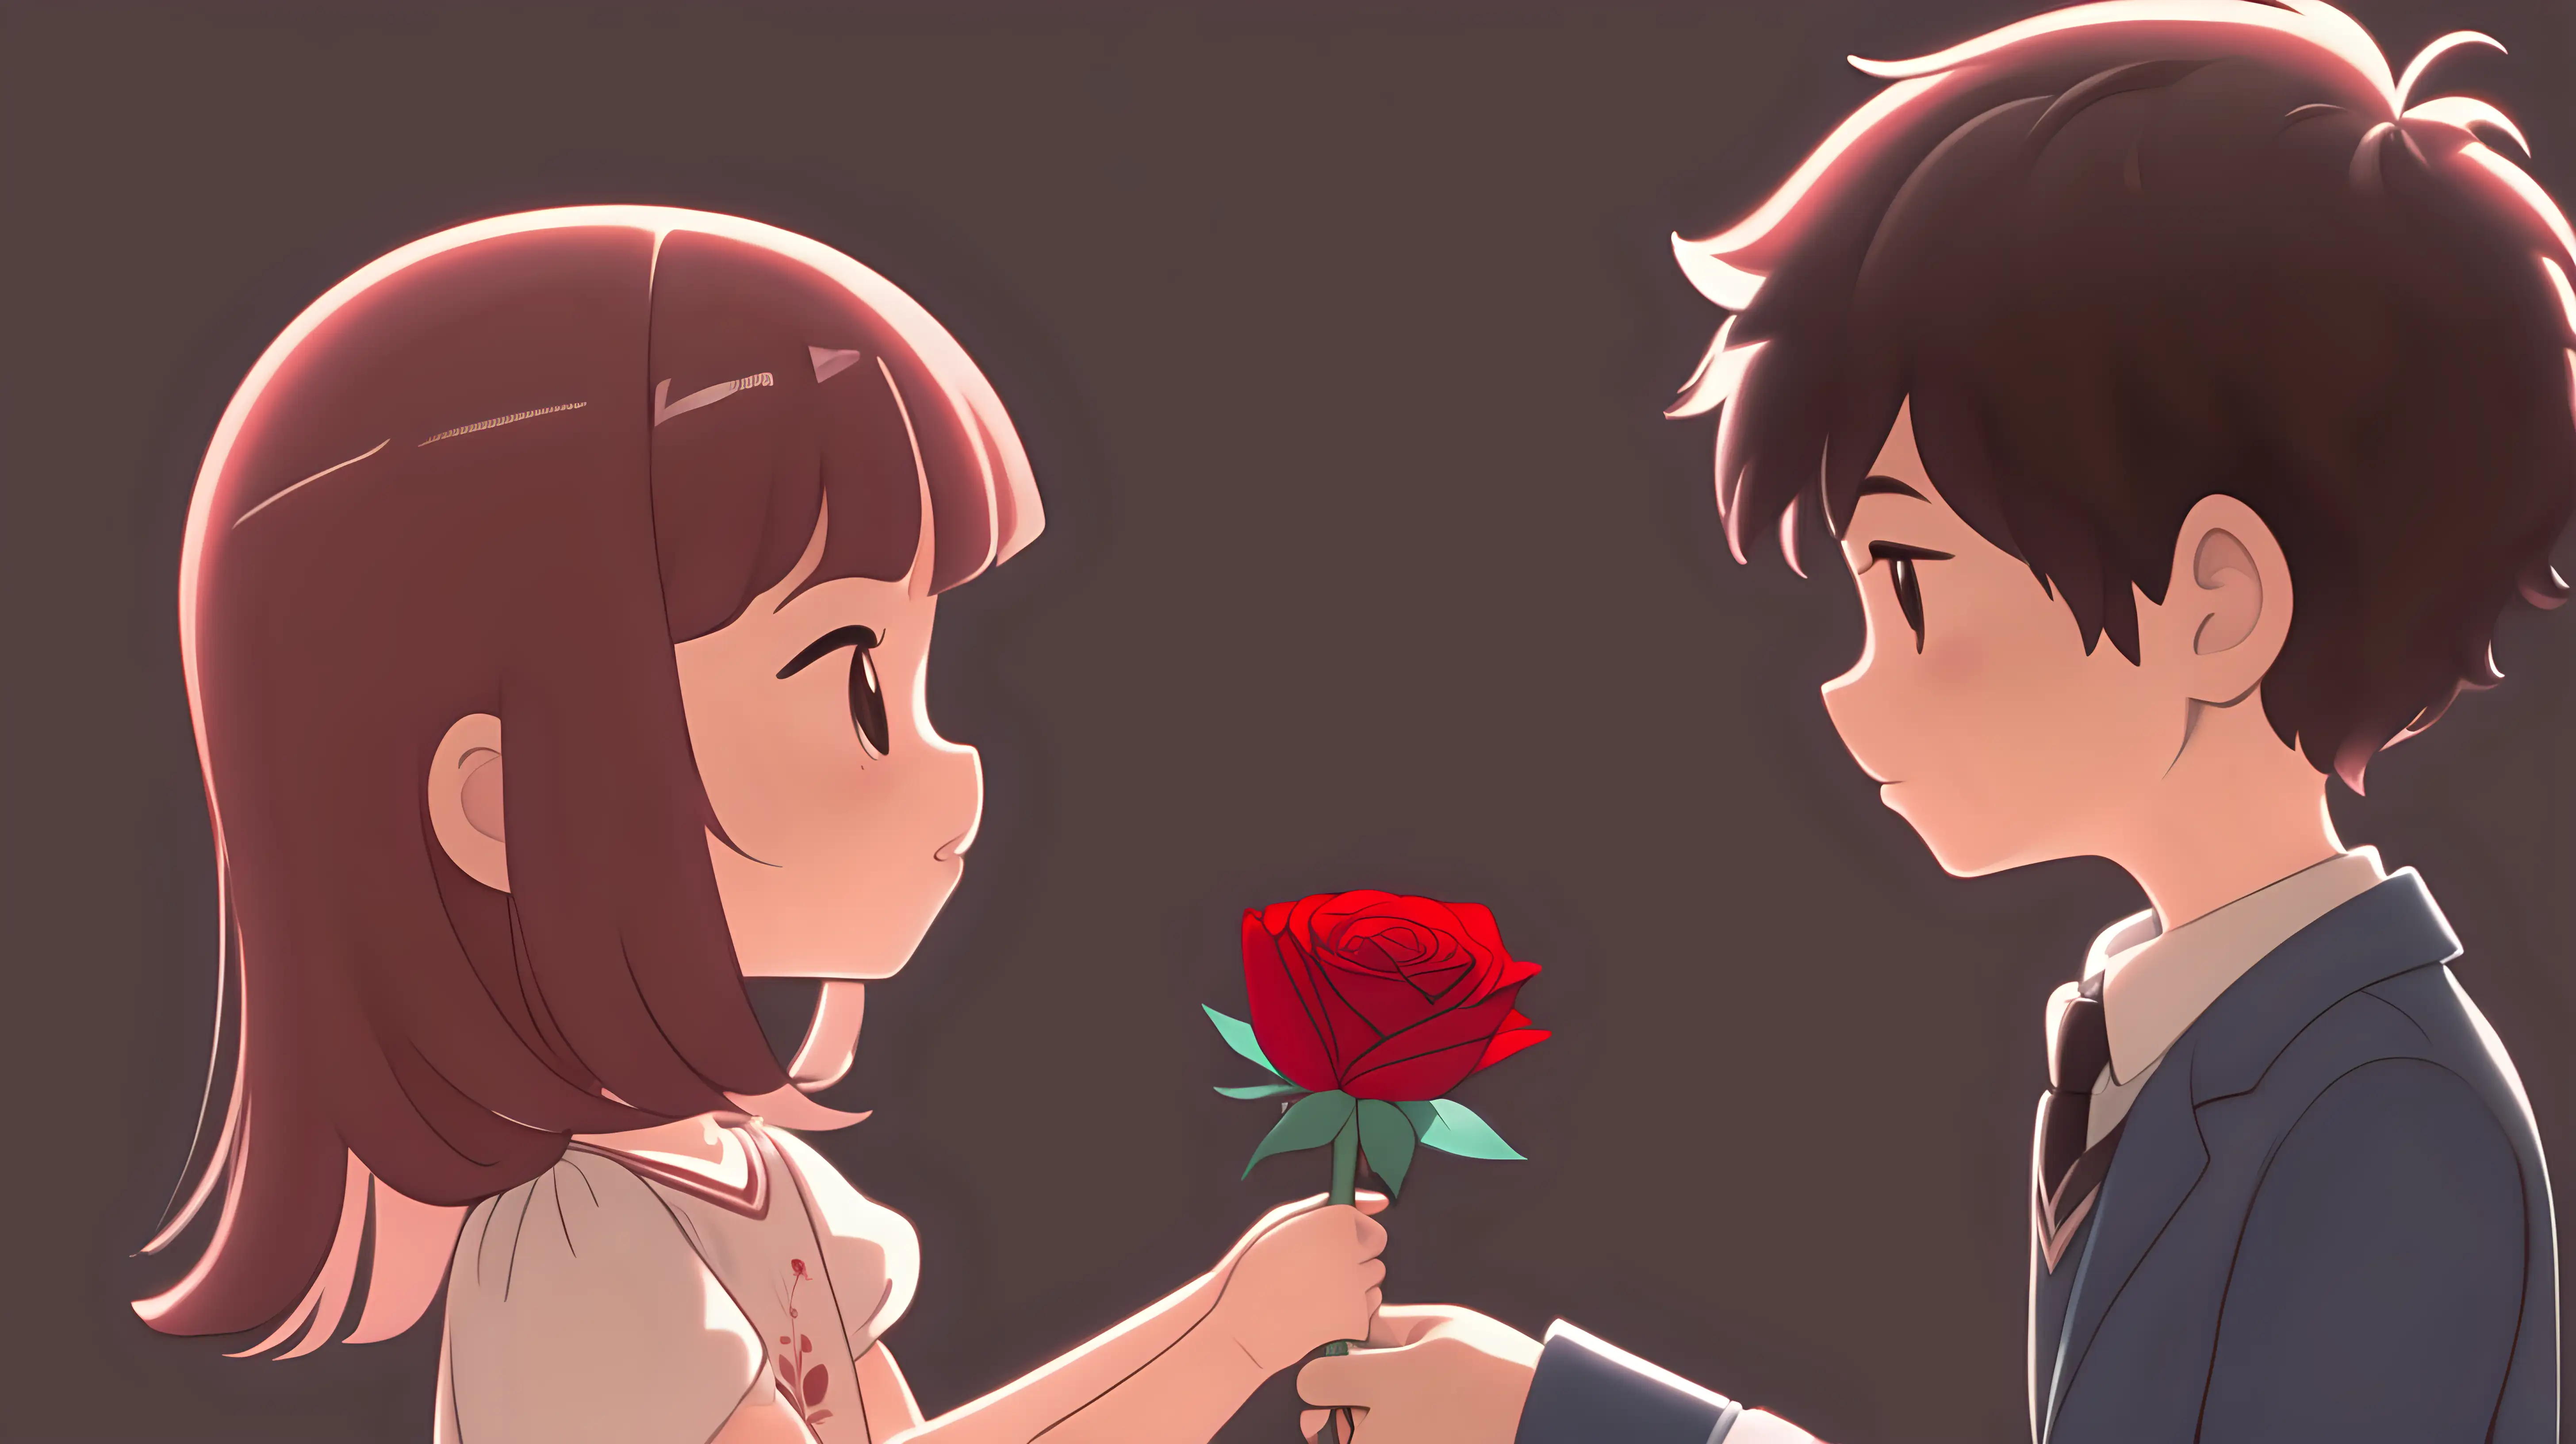 Adorable Animation Nervous Boy Presents Blushing Girl with a Red Rose